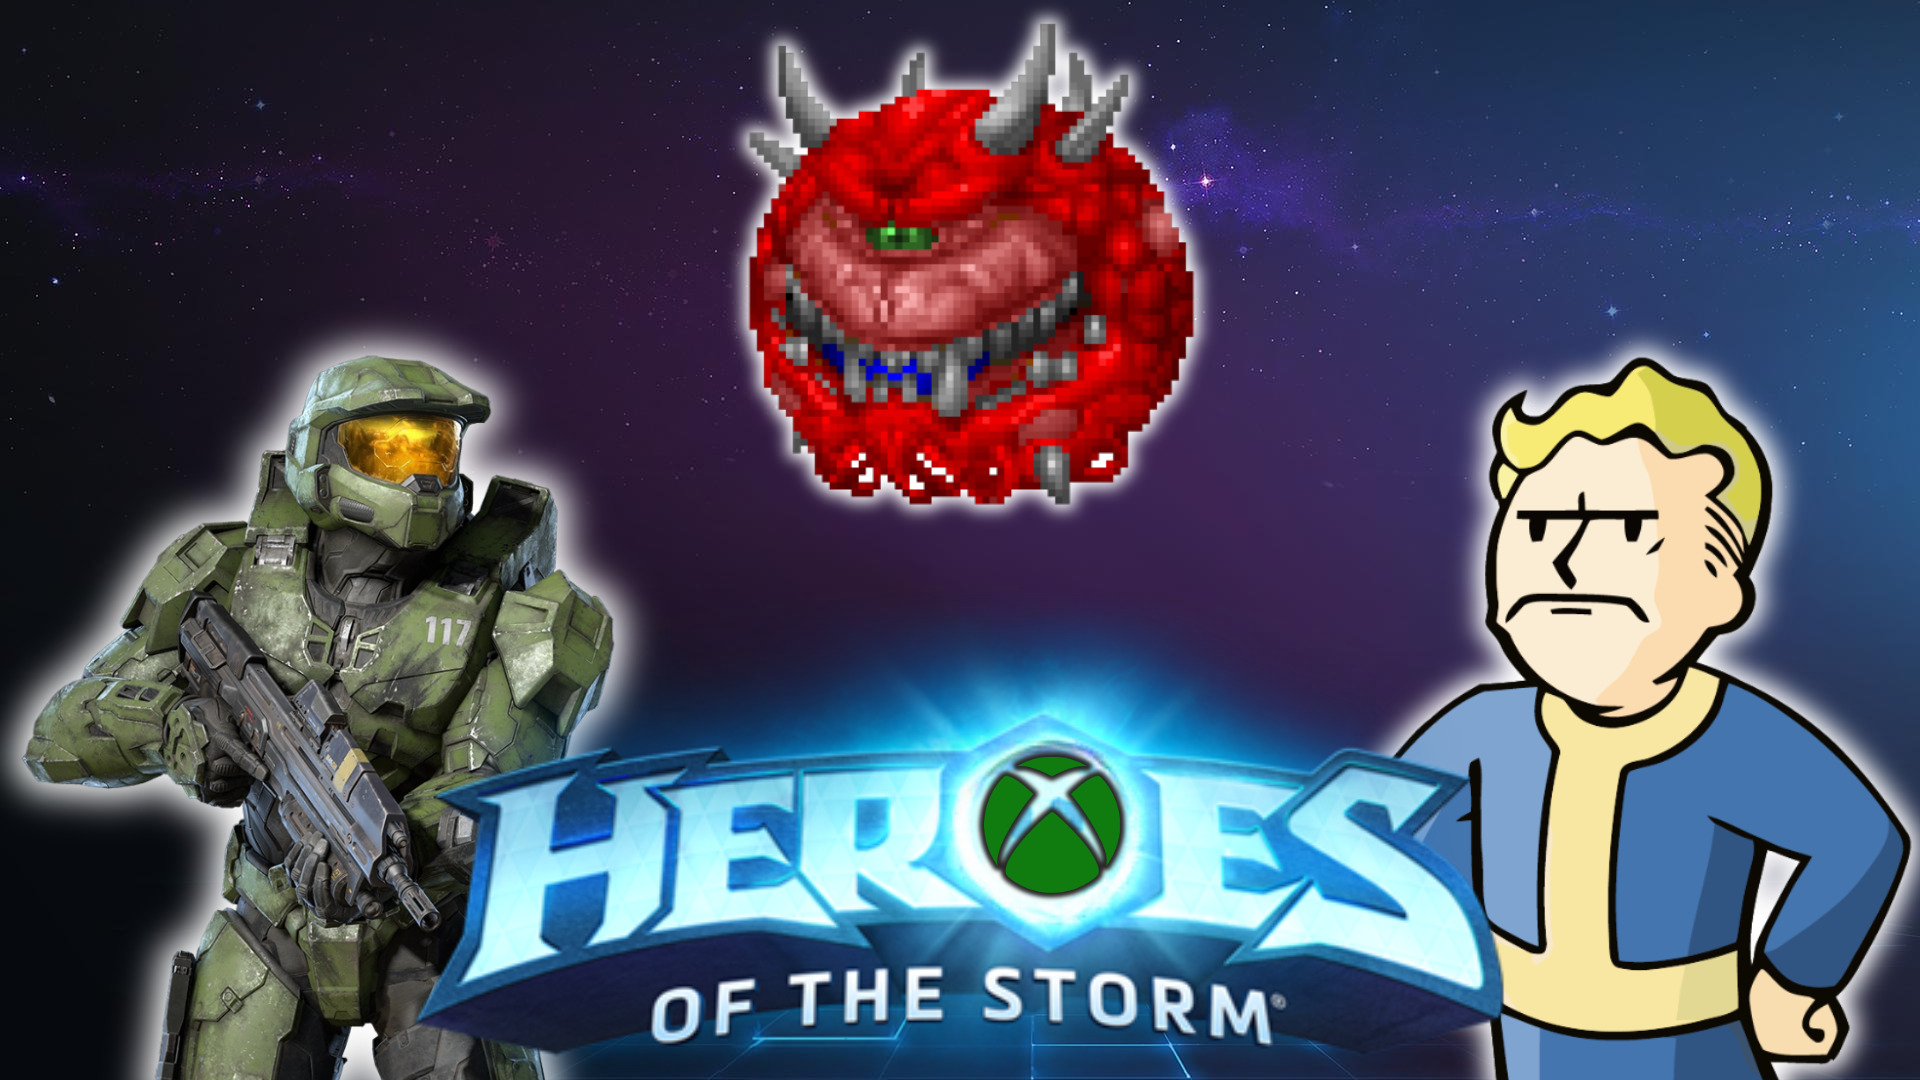 Dear Microsoft: Bring back Heroes of the Storm